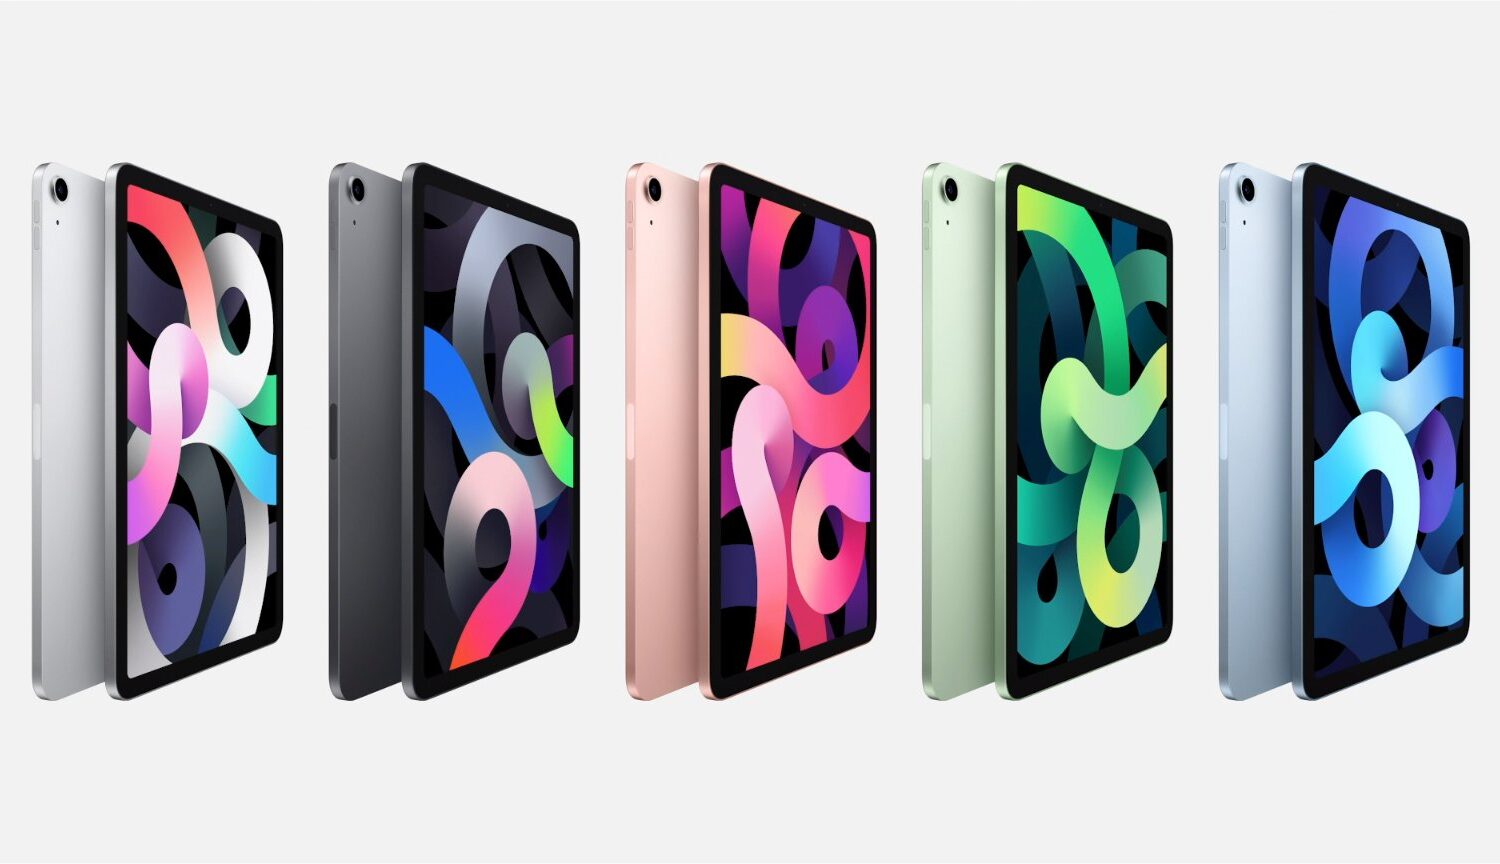 Apple iPad Air 2020 with 10.9-inch Liquid Ratina display, A14 Bionic and Touch ID is now official